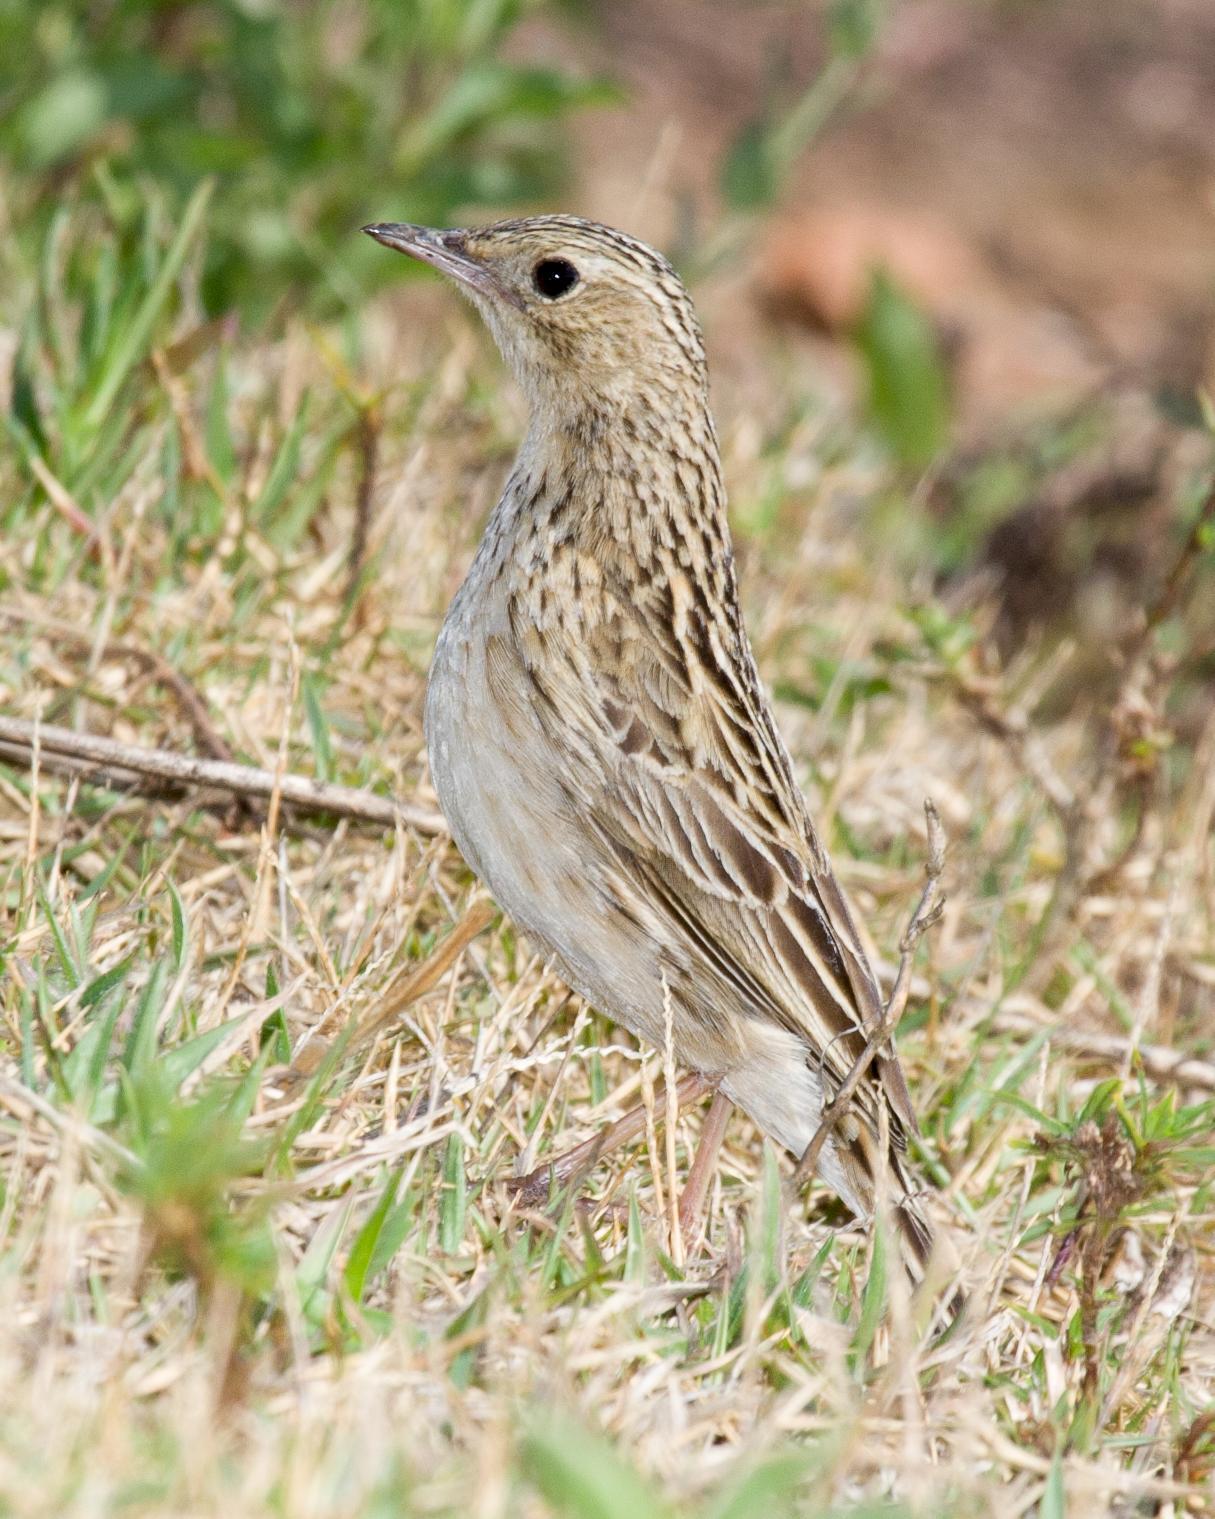 Hellmayr's Pipit Photo by Robert Lewis